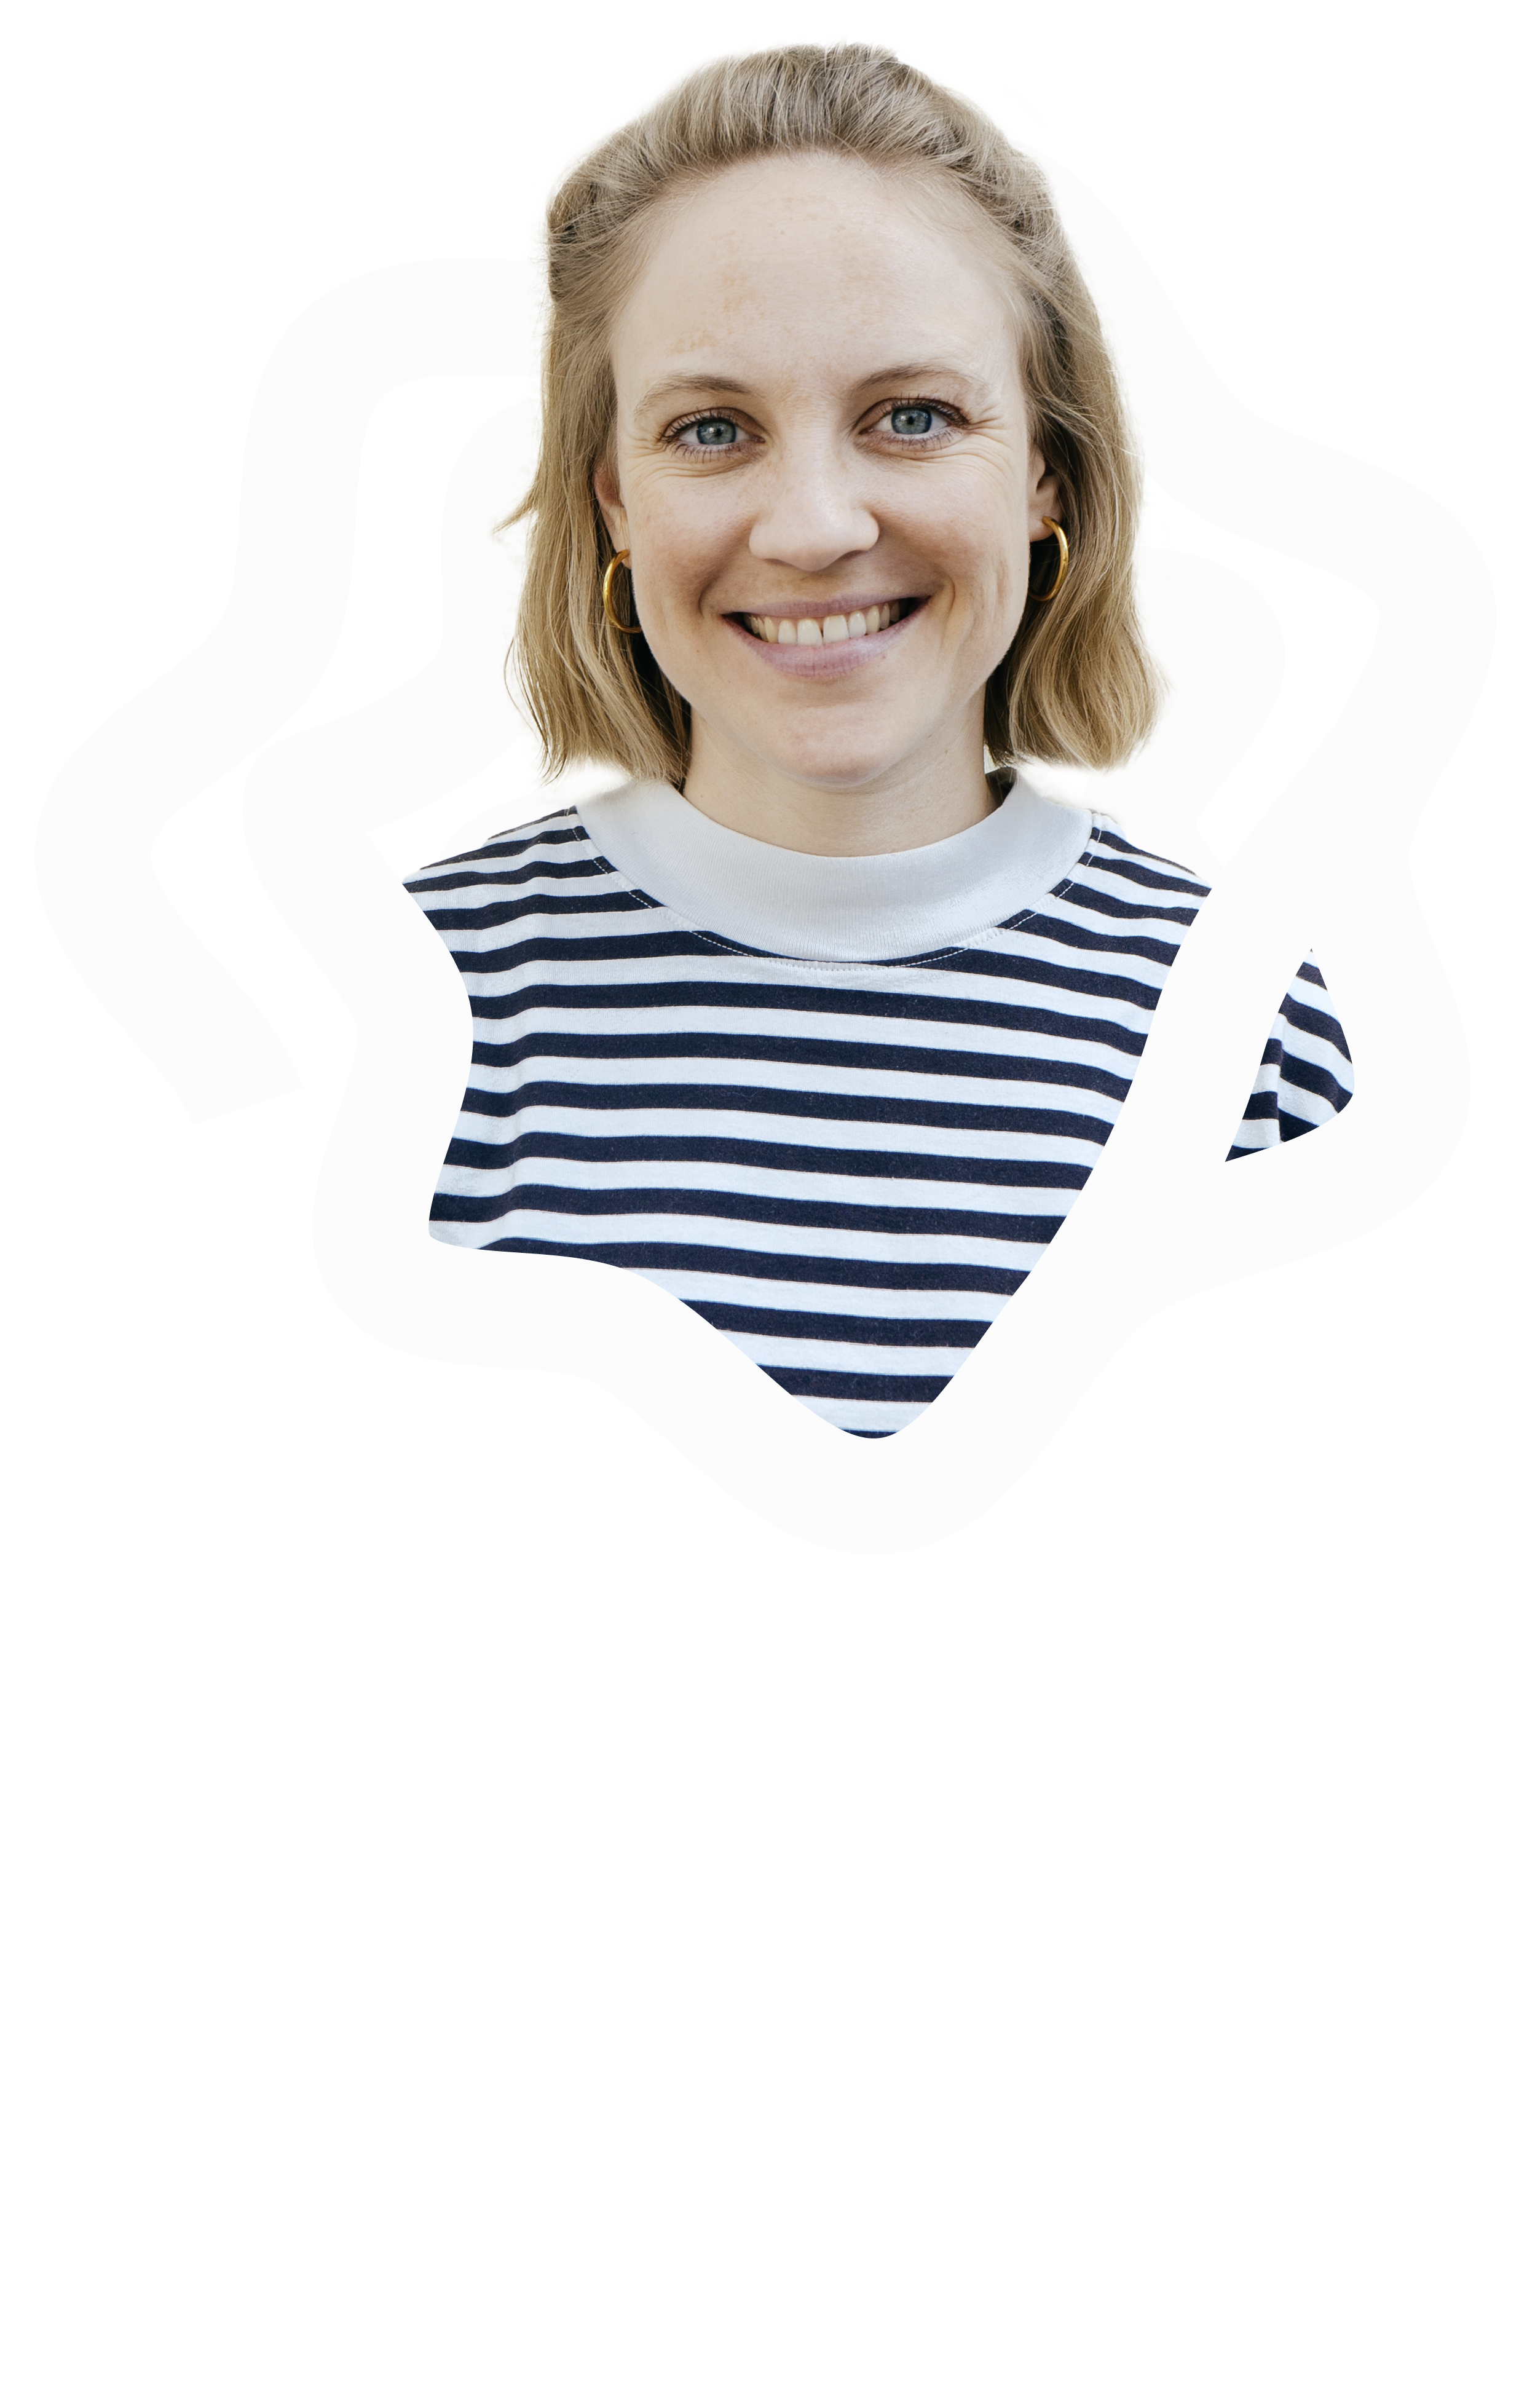 Lisanne Rother